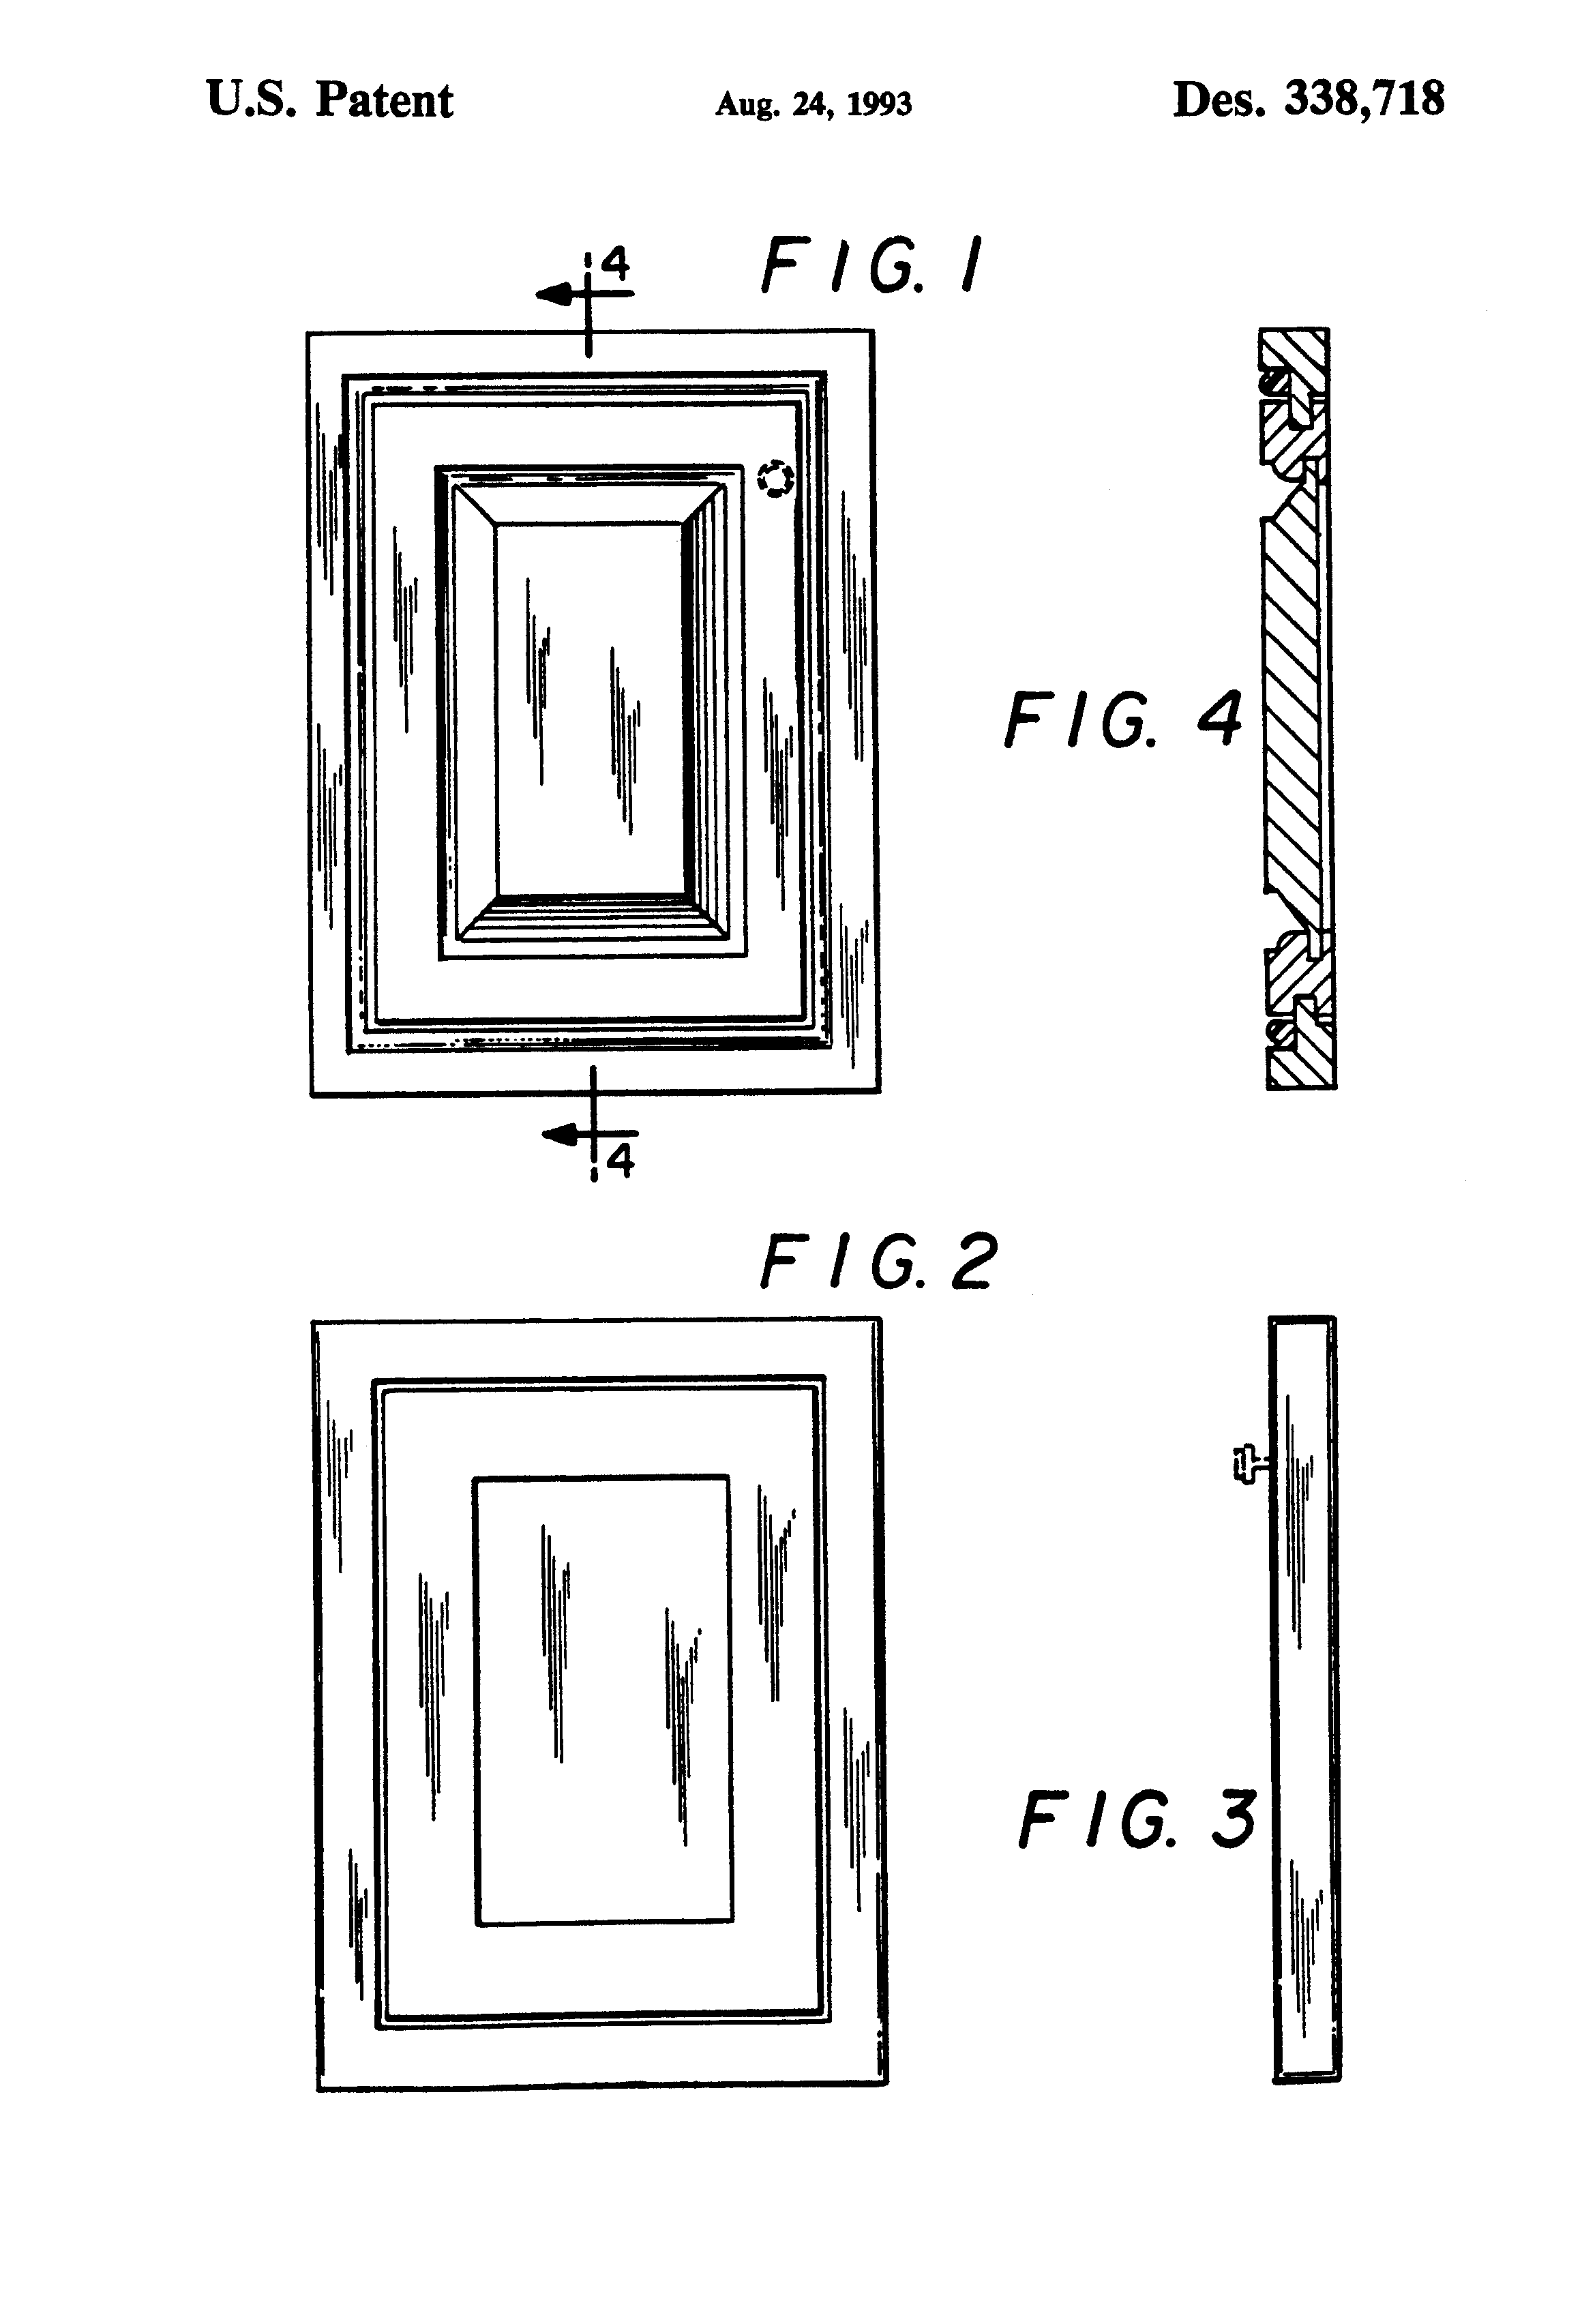 example of an image from a cabinet door design patent